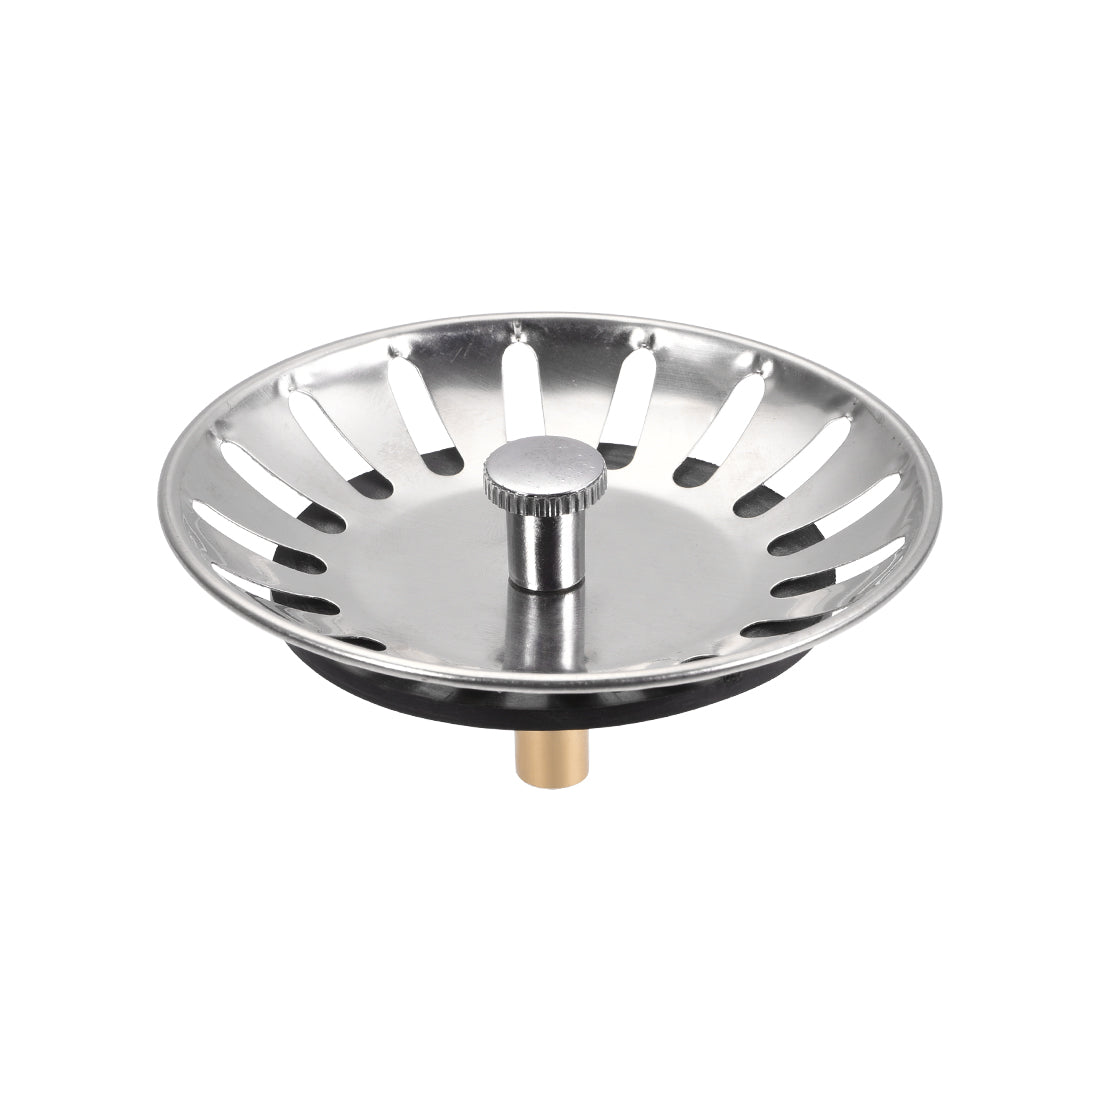 uxcell Uxcell Kitchen Sink Strainer Stainless Steel Basket Grip 79mm with Rubber Stopper for Drains